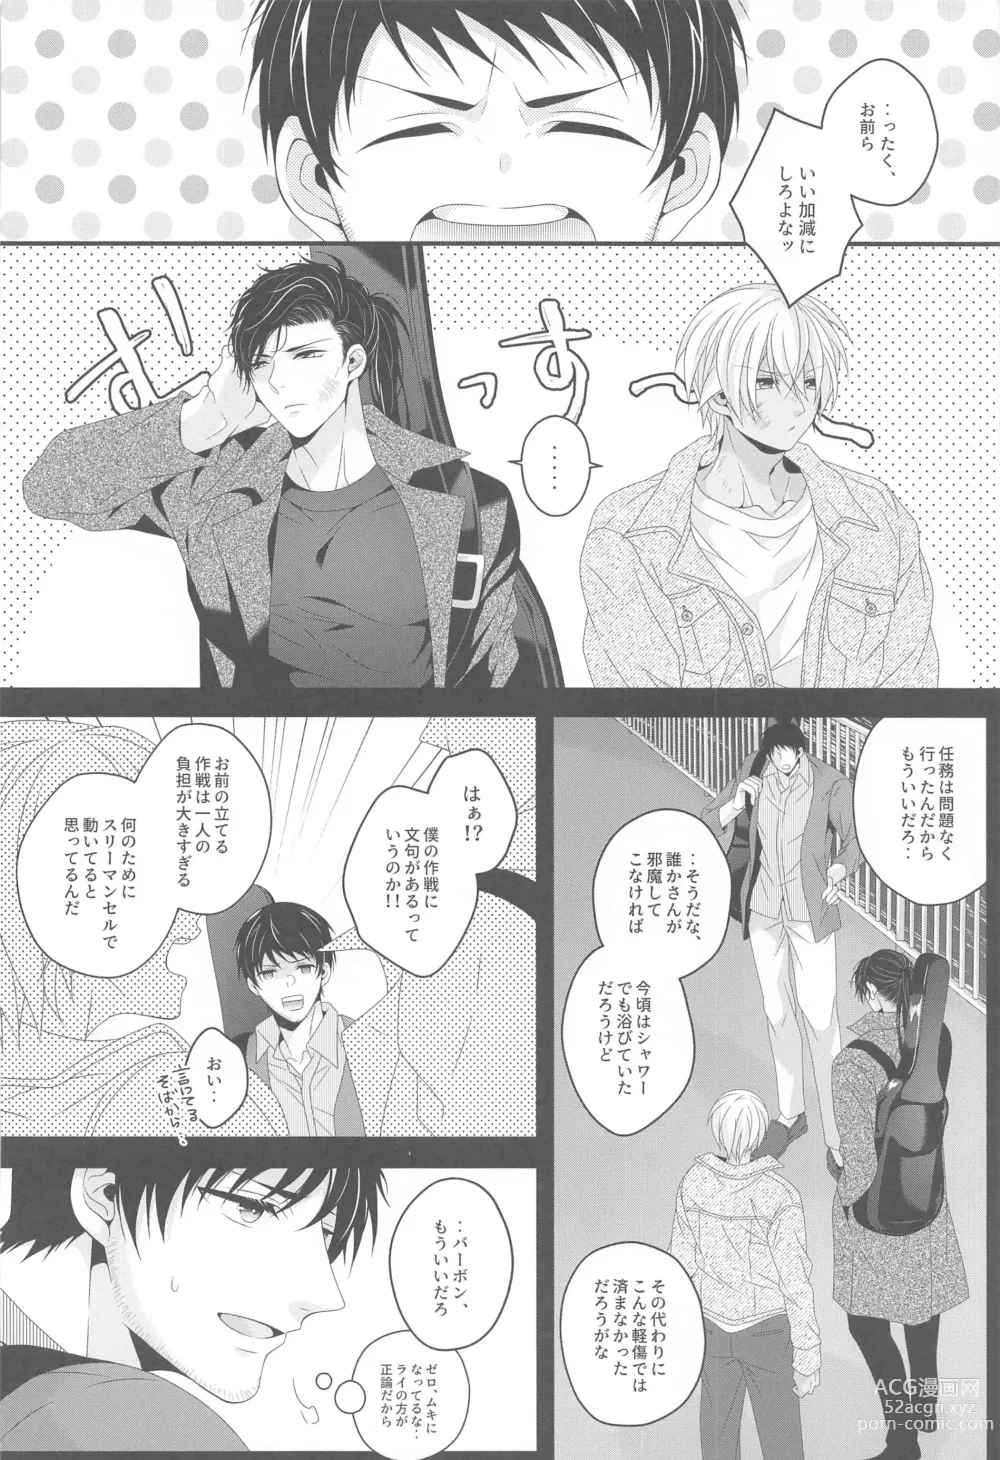 Page 3 of doujinshi Aibetsuriku no Yosame - A rainy night the pain of separation from loved ones